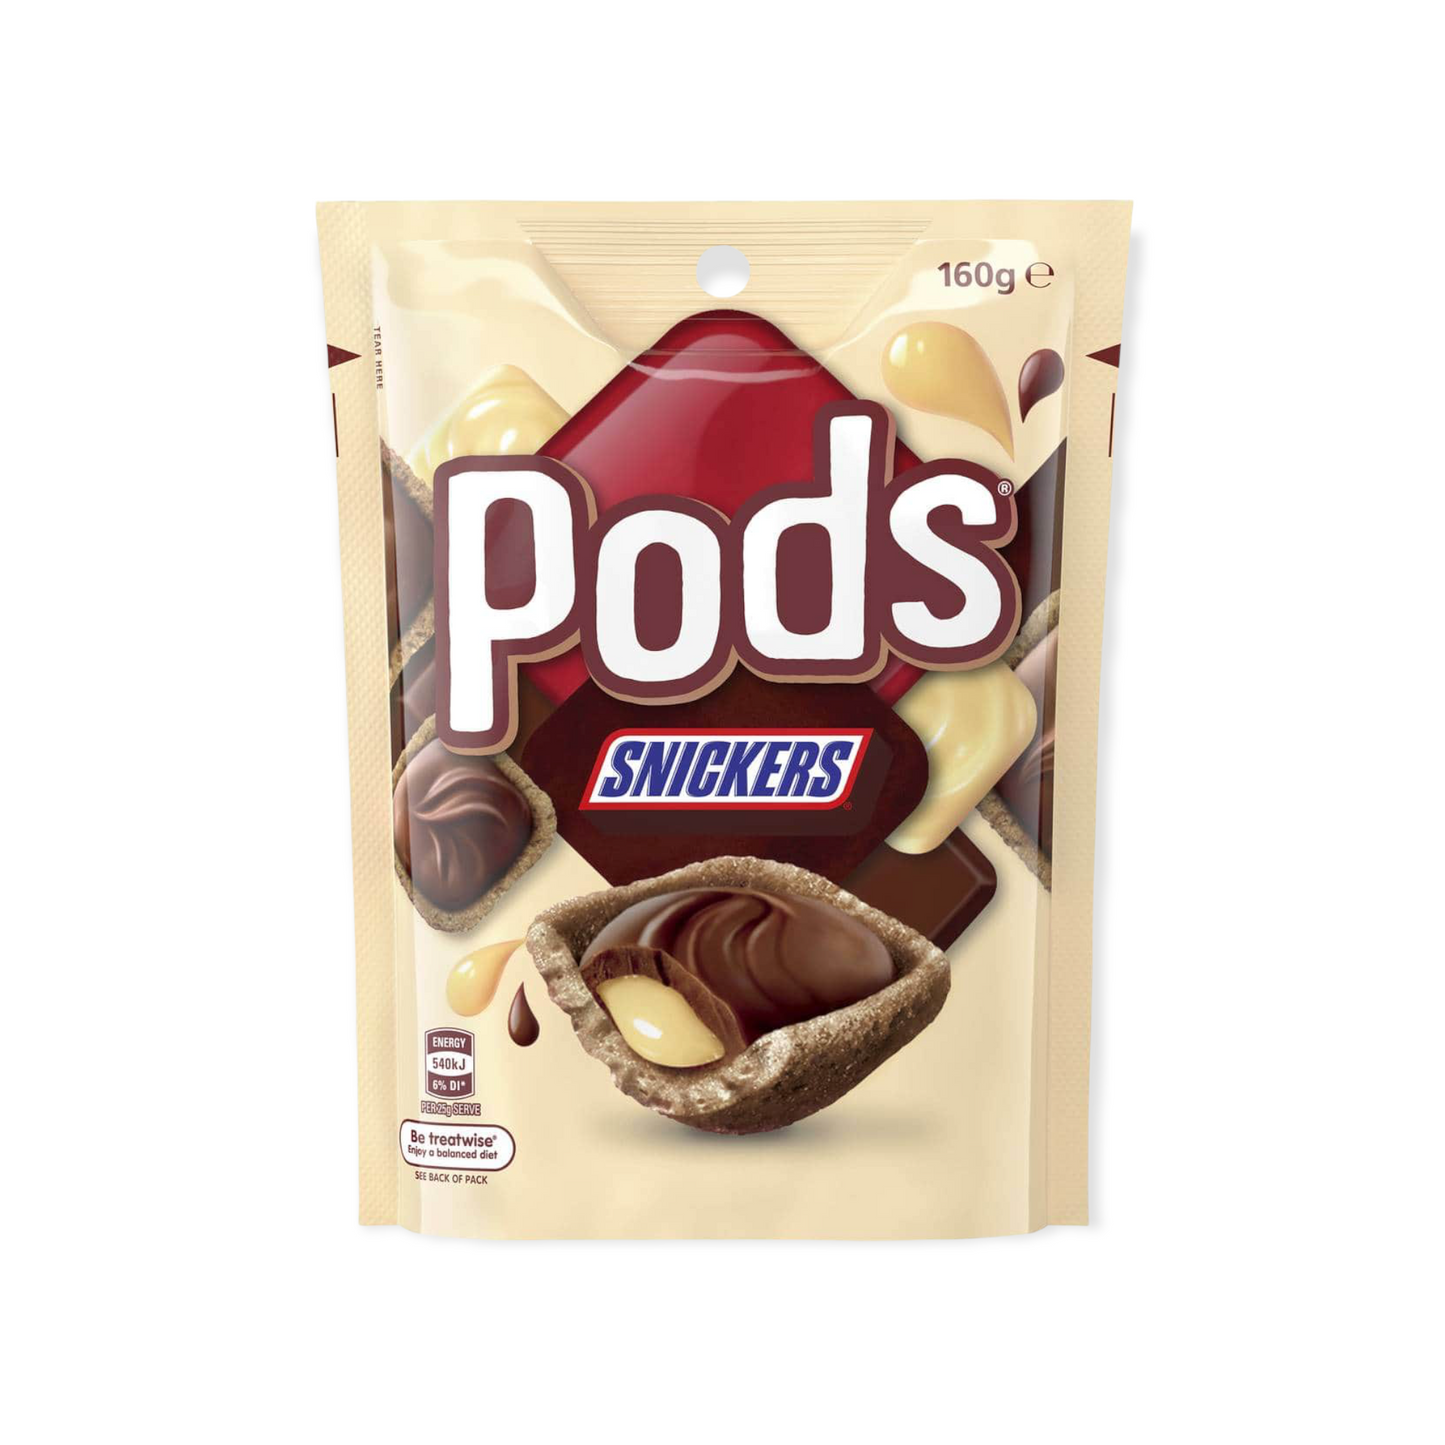 Snickers Pods Chocolate Pouch (160g) Australia Import